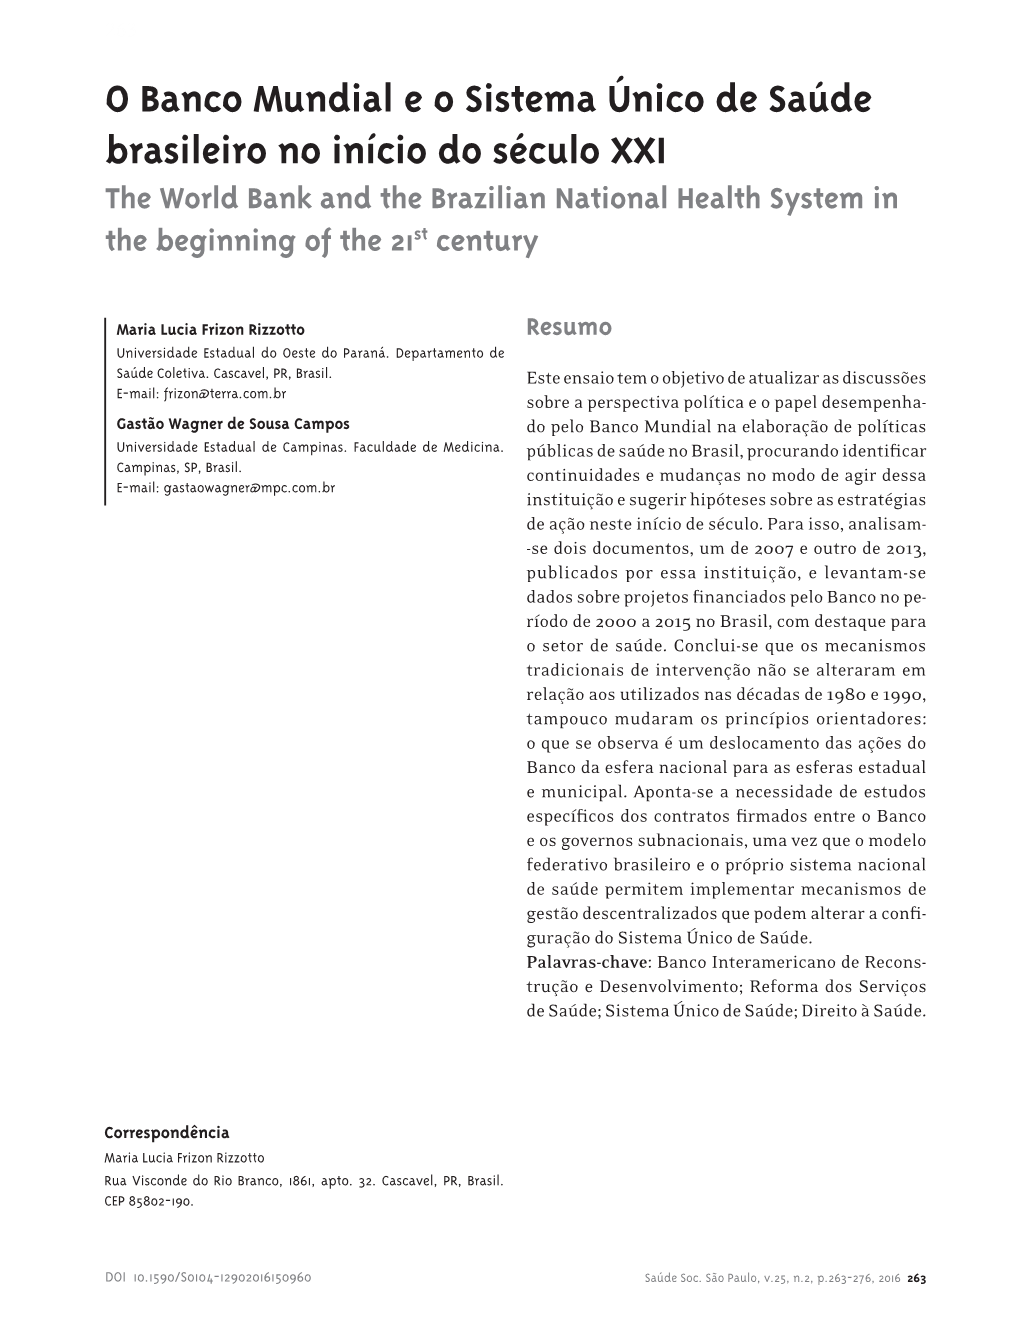 The World Bank and the Brazilian National Health System in the Beginning of the 21St Century